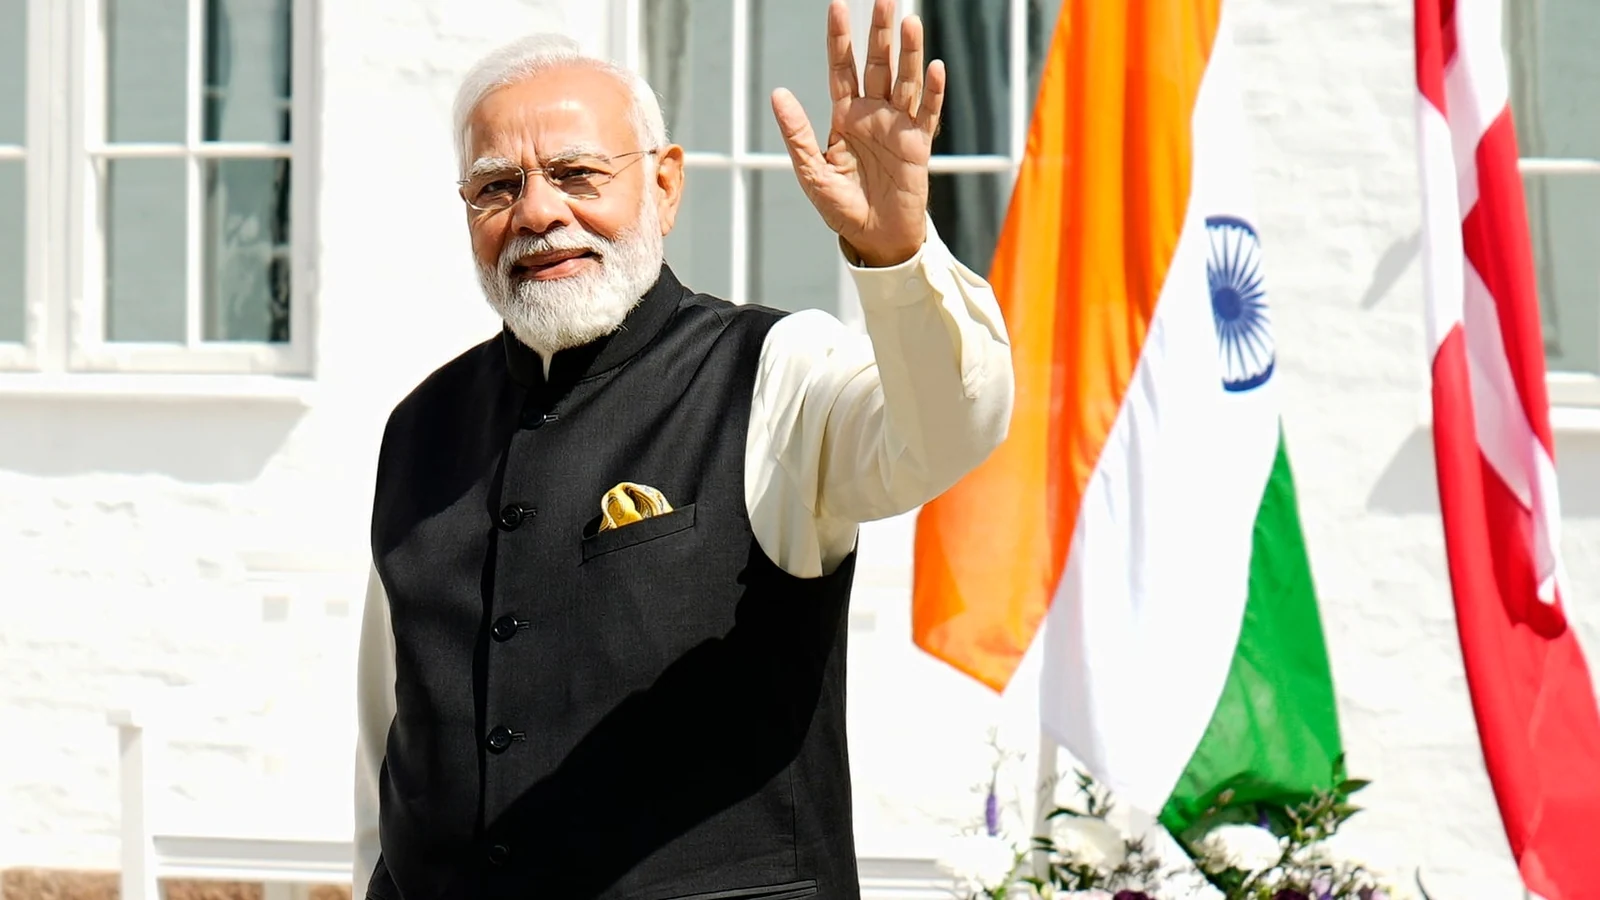 ‘LiFE’: In global initiative, PM Modi to call for ‘lifestyle for environmental movement’